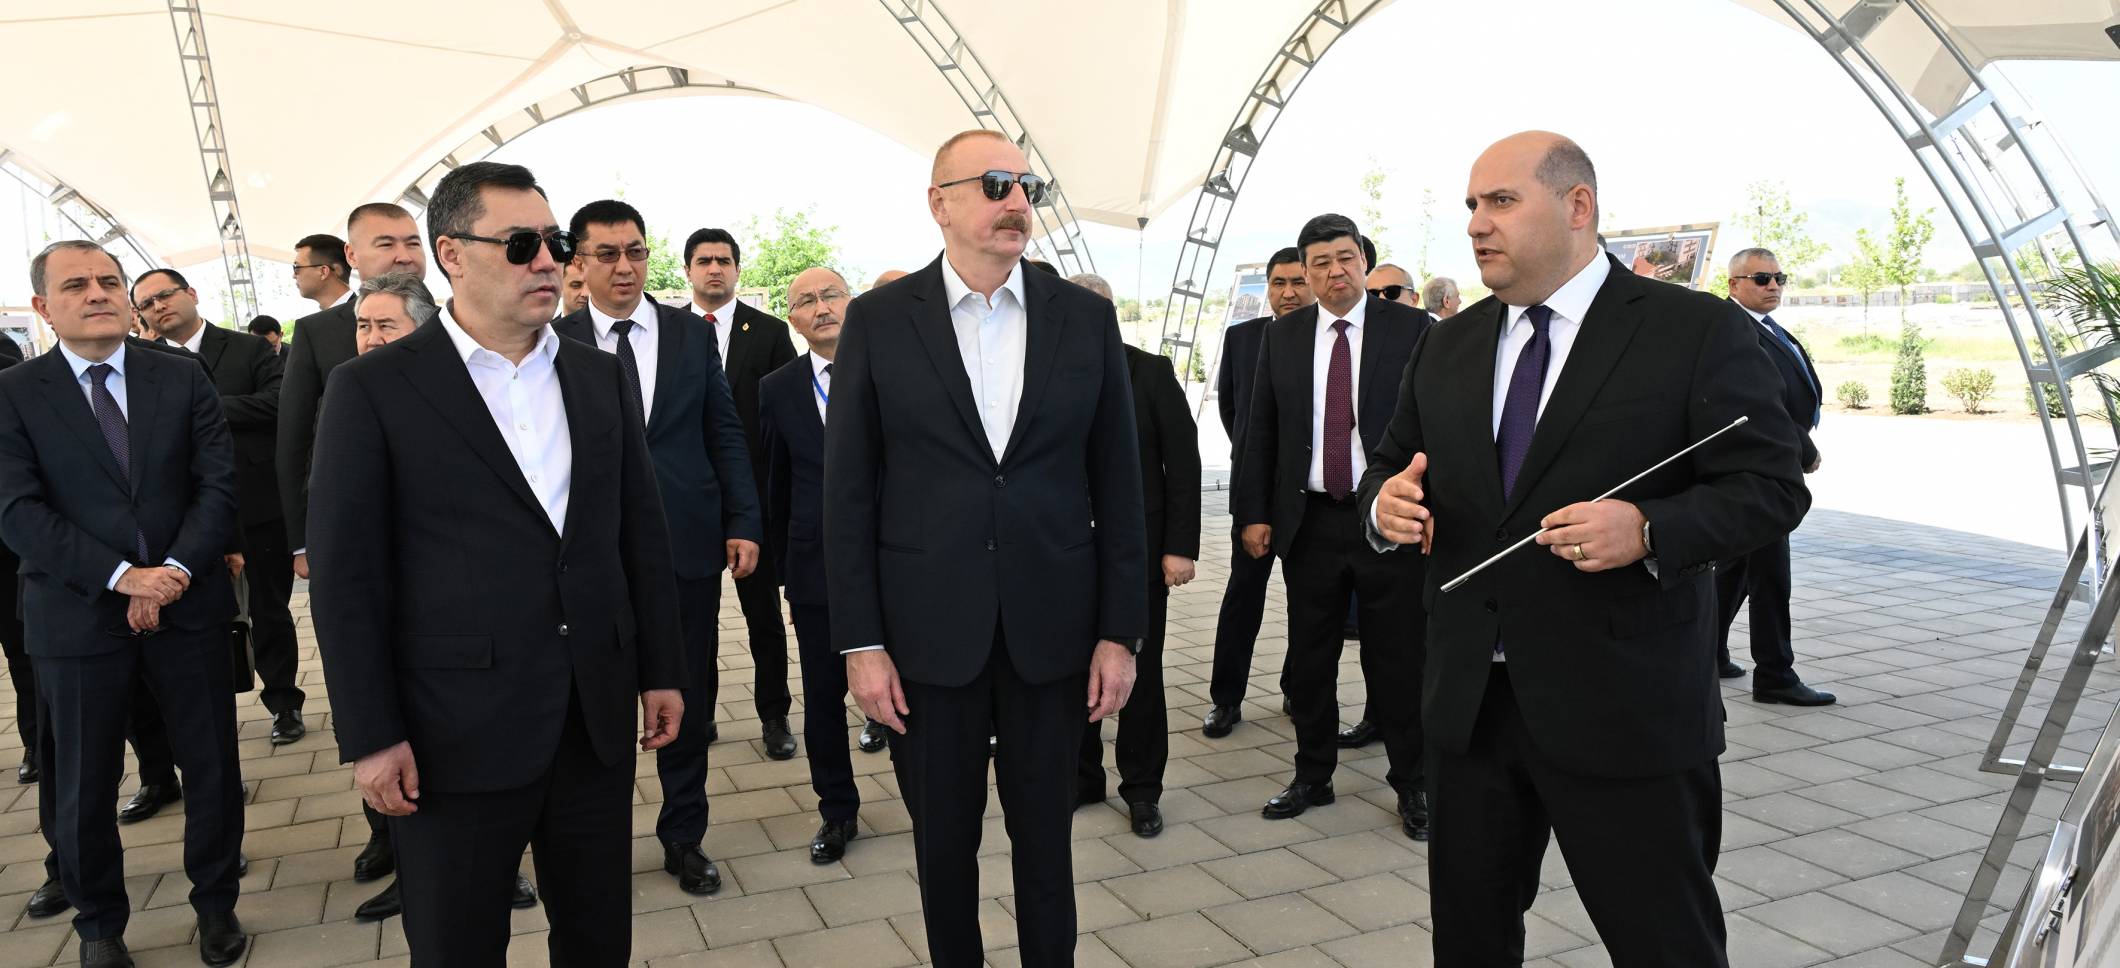 Presidents of Azerbaijan and Kyrgyzstan visited city of Aghdam